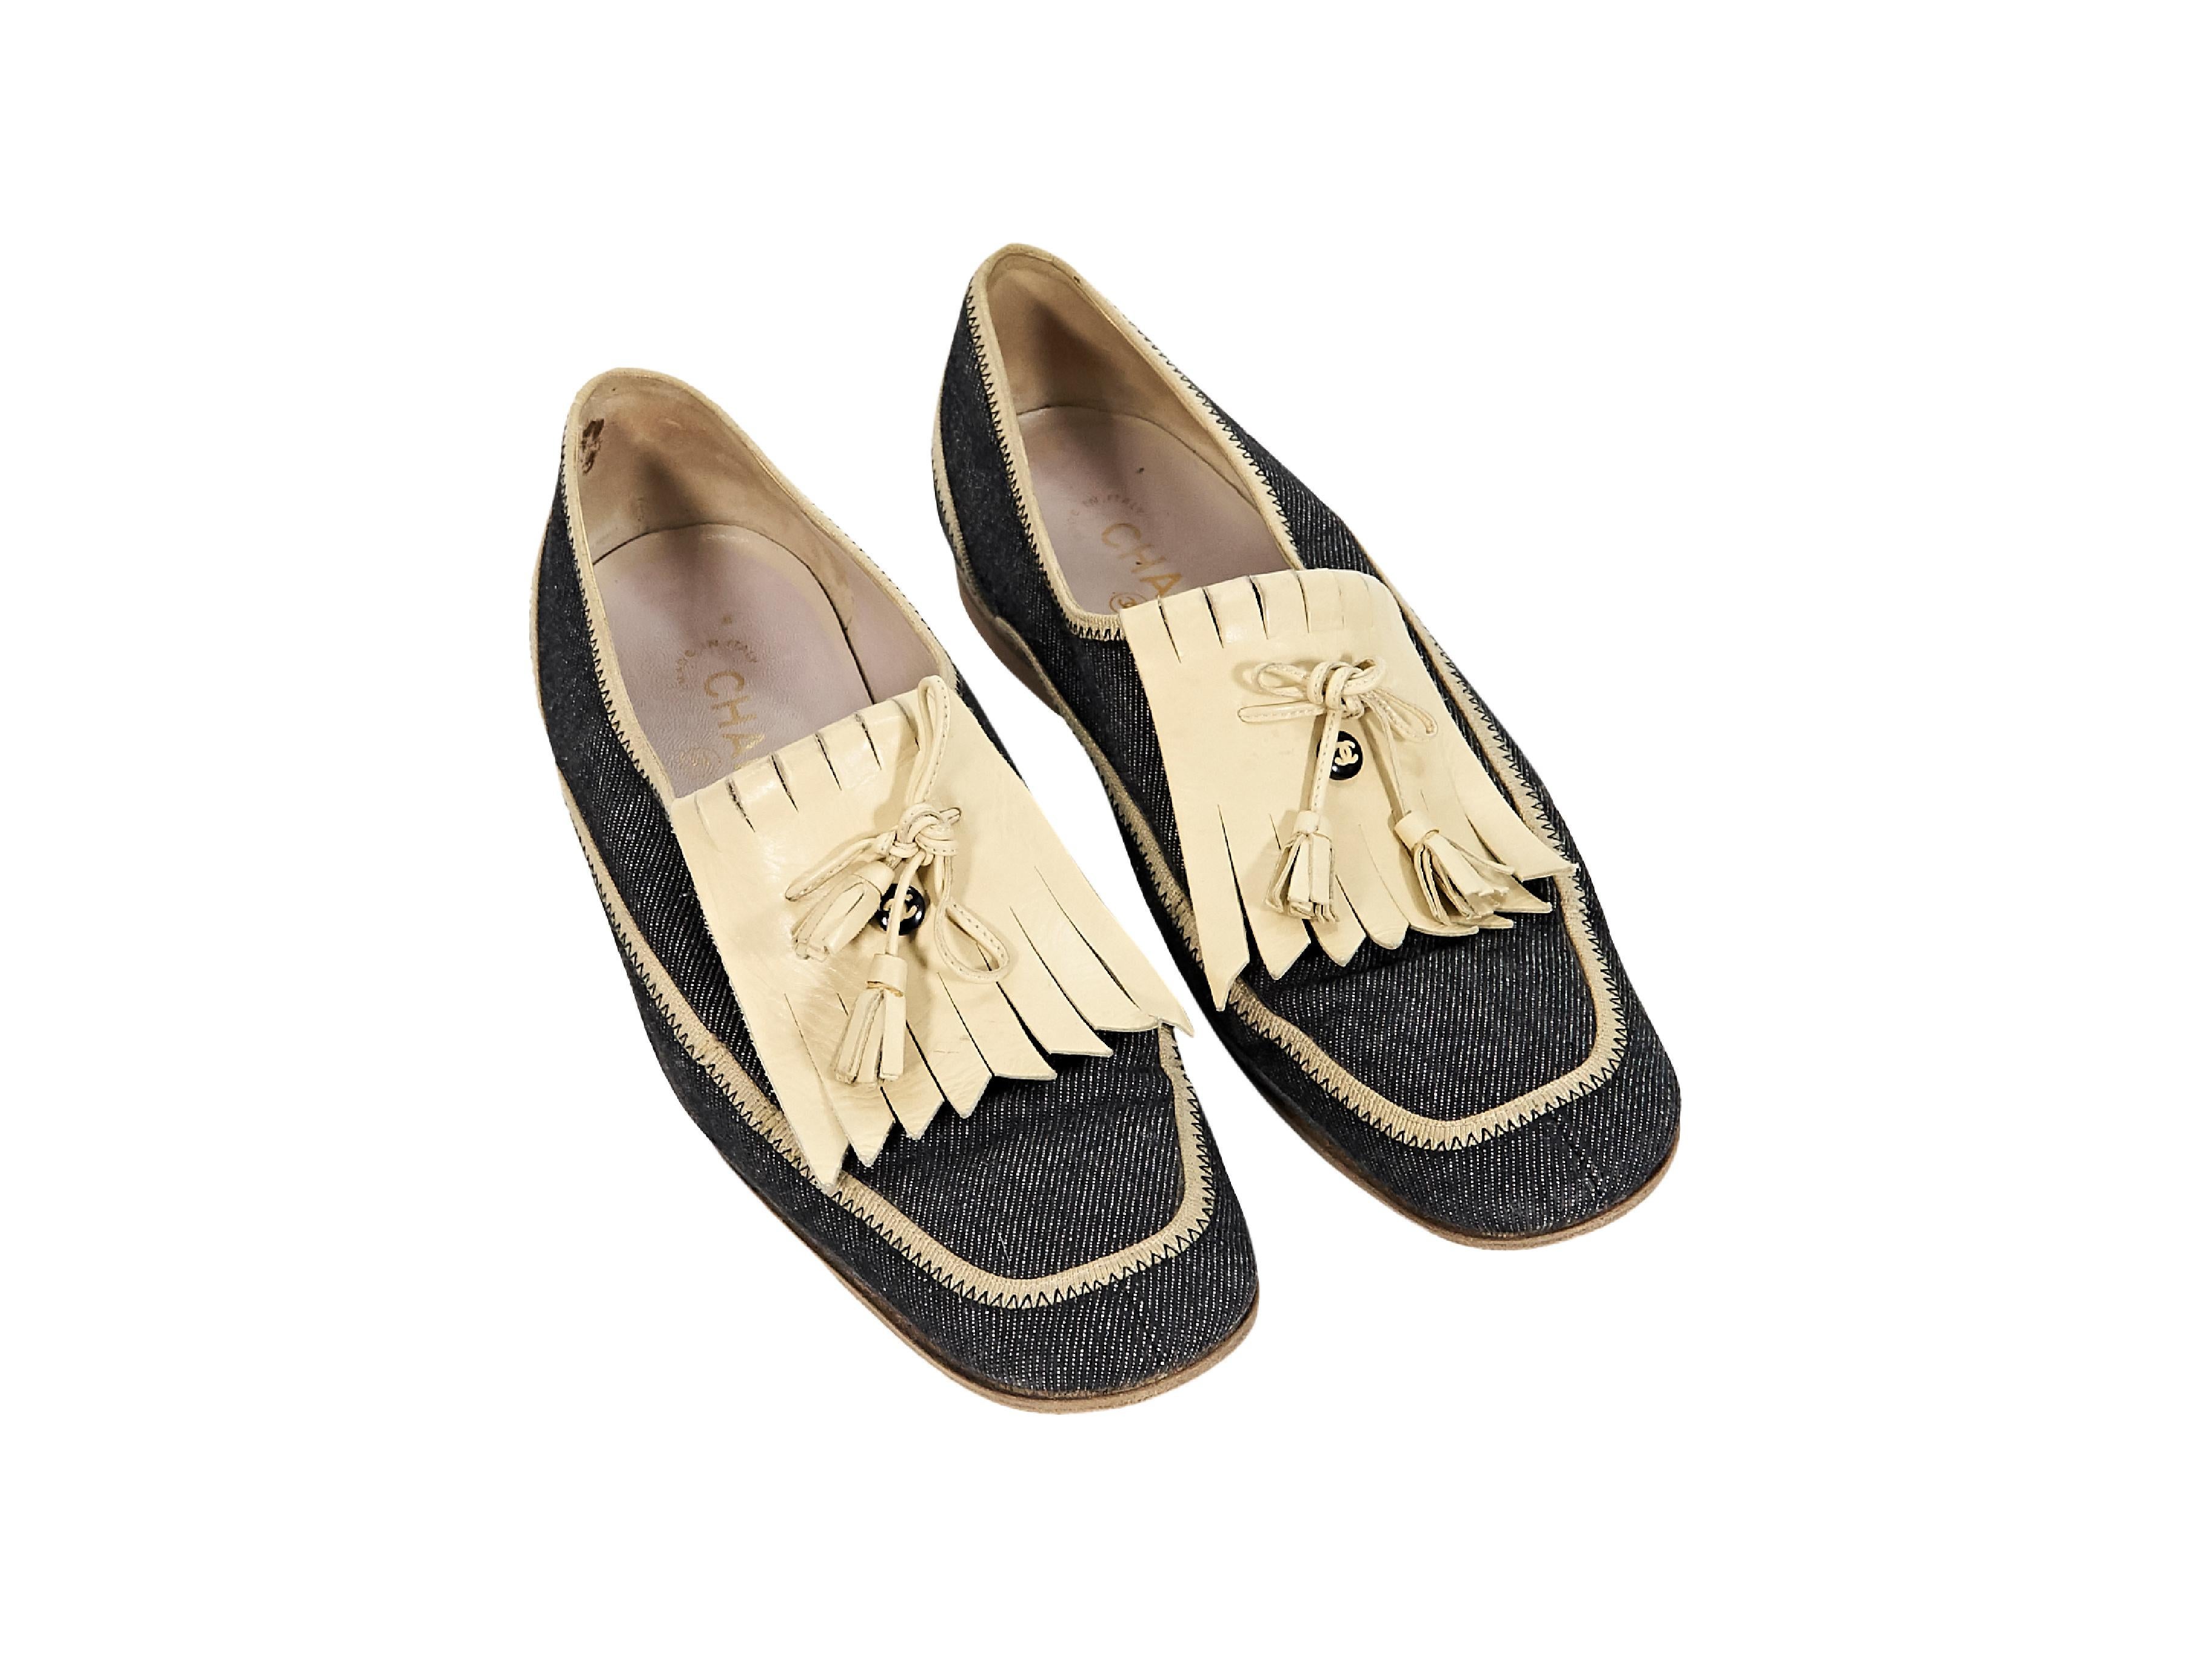 Product details:  Blue denim loafers by Chanel.  Ivory leather fringe tongue design.  Accented with tassels.  Low stacked heel.  Slip-on style.  0.75